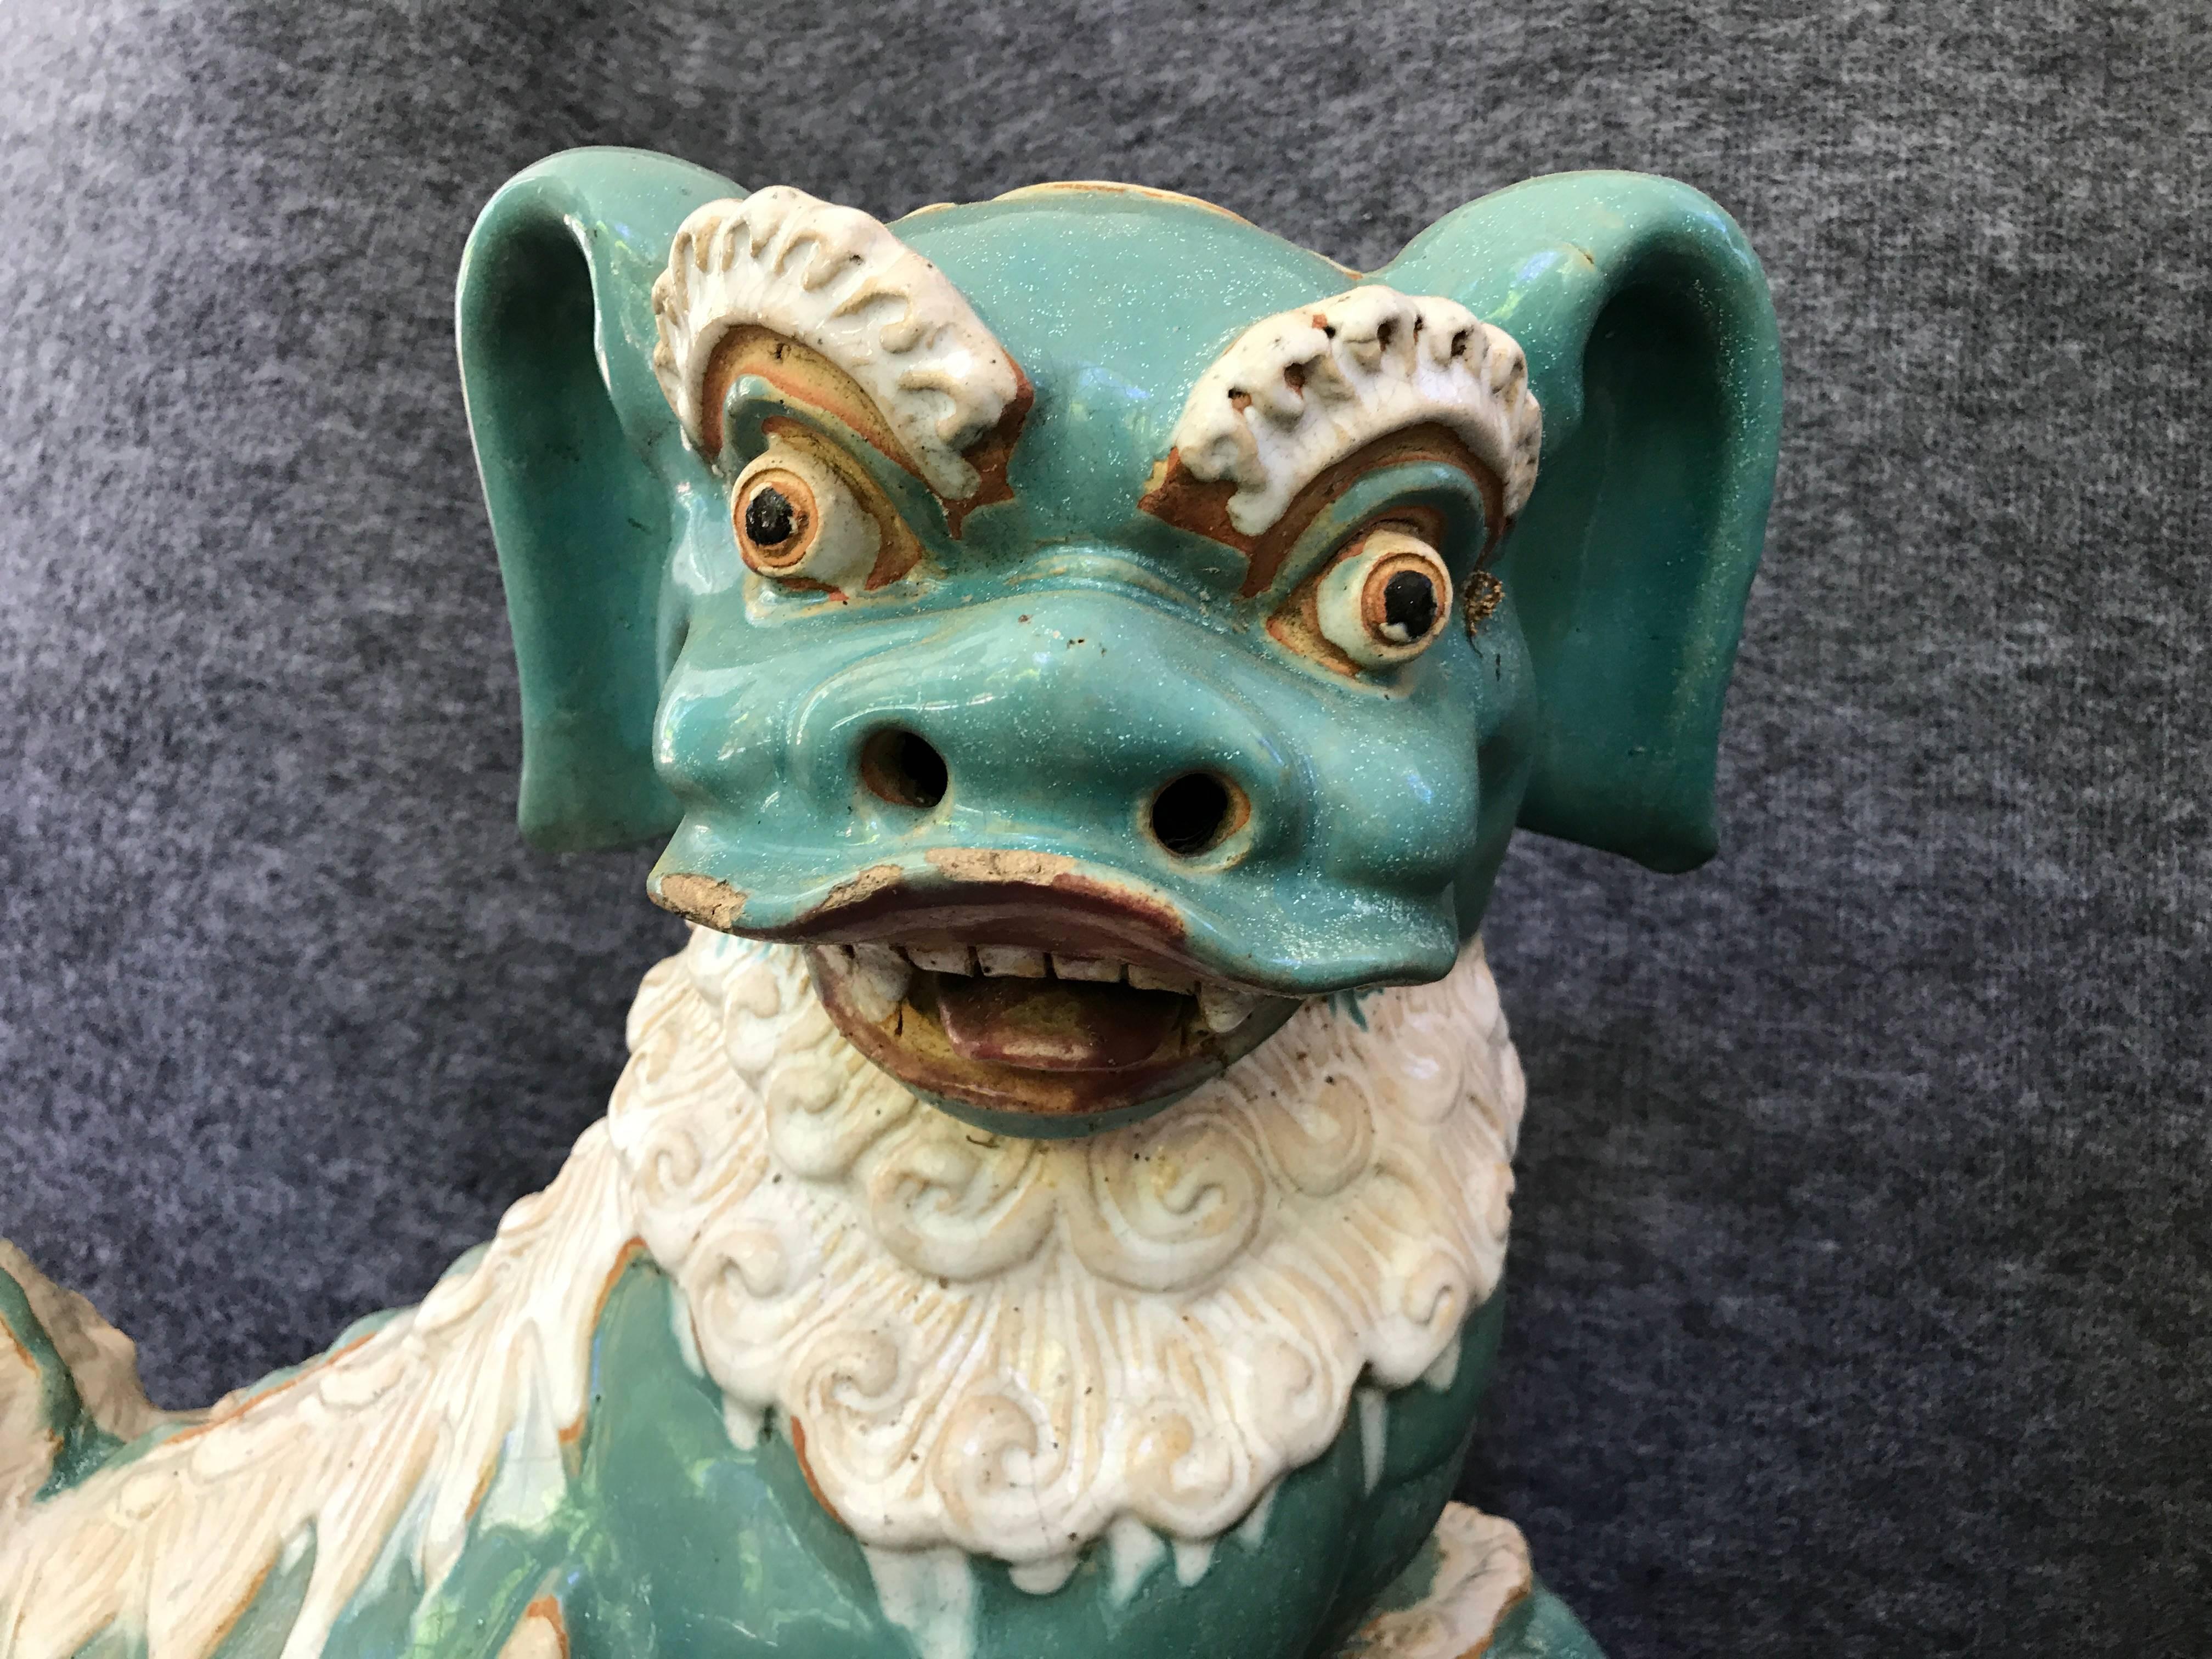 Glazed 1970s Large Terracotta Turquoise and White Foo Dog Sculpture Statues, Pair